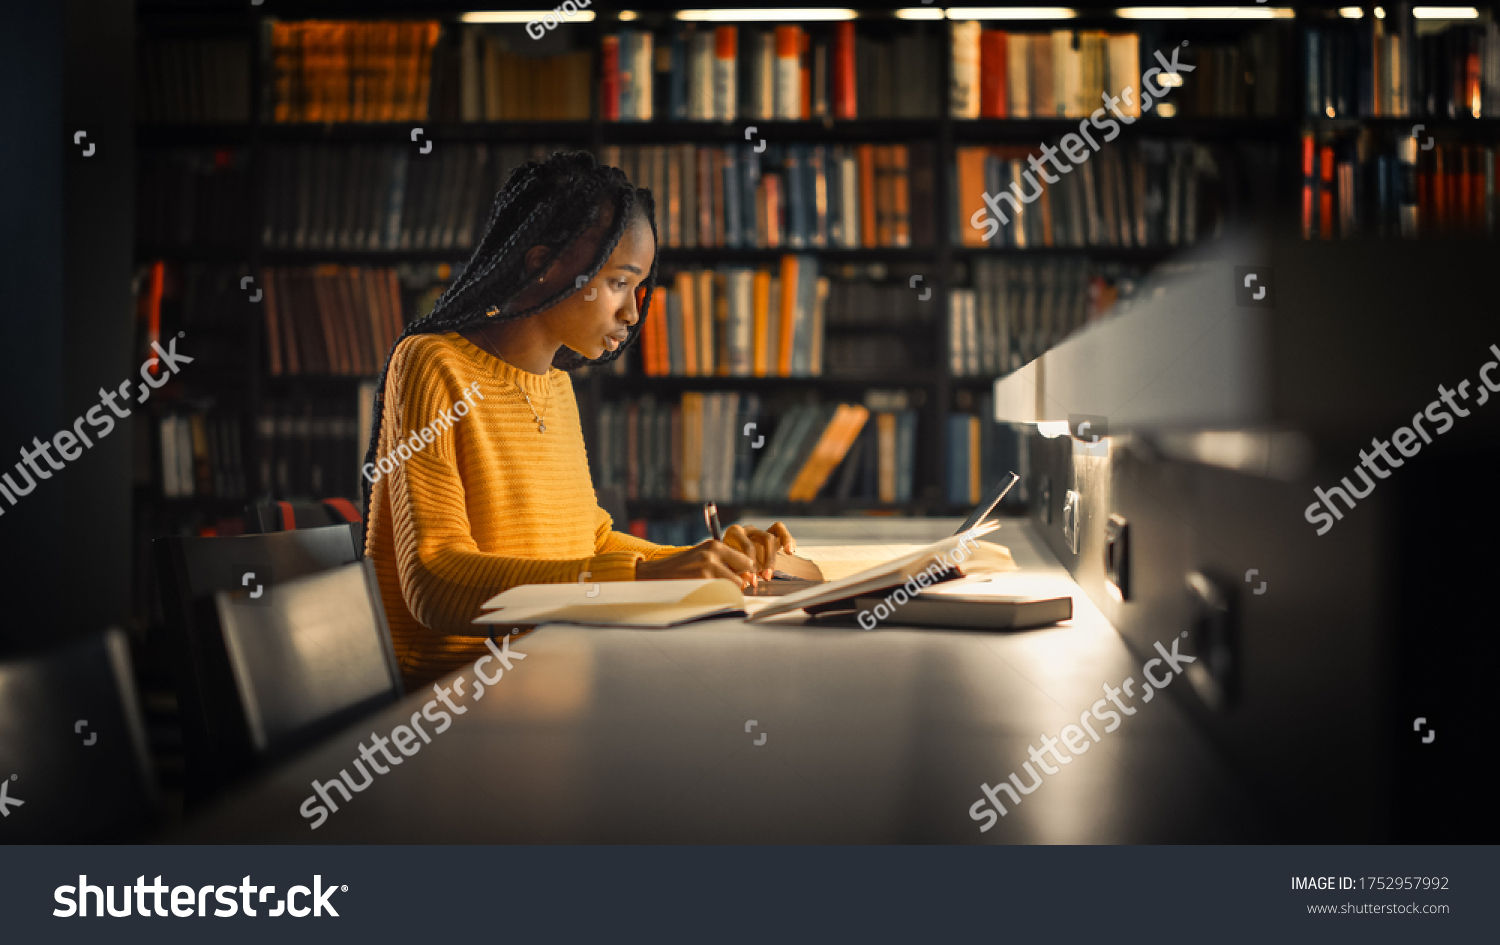 University Library: Gifted Black Girl uses Laptop, Writes Notes for the Paper, Essay, Study for Class Assignment. Students Learning, Studying for Exams College. Side View Portrait with Bookshelves #1752957992